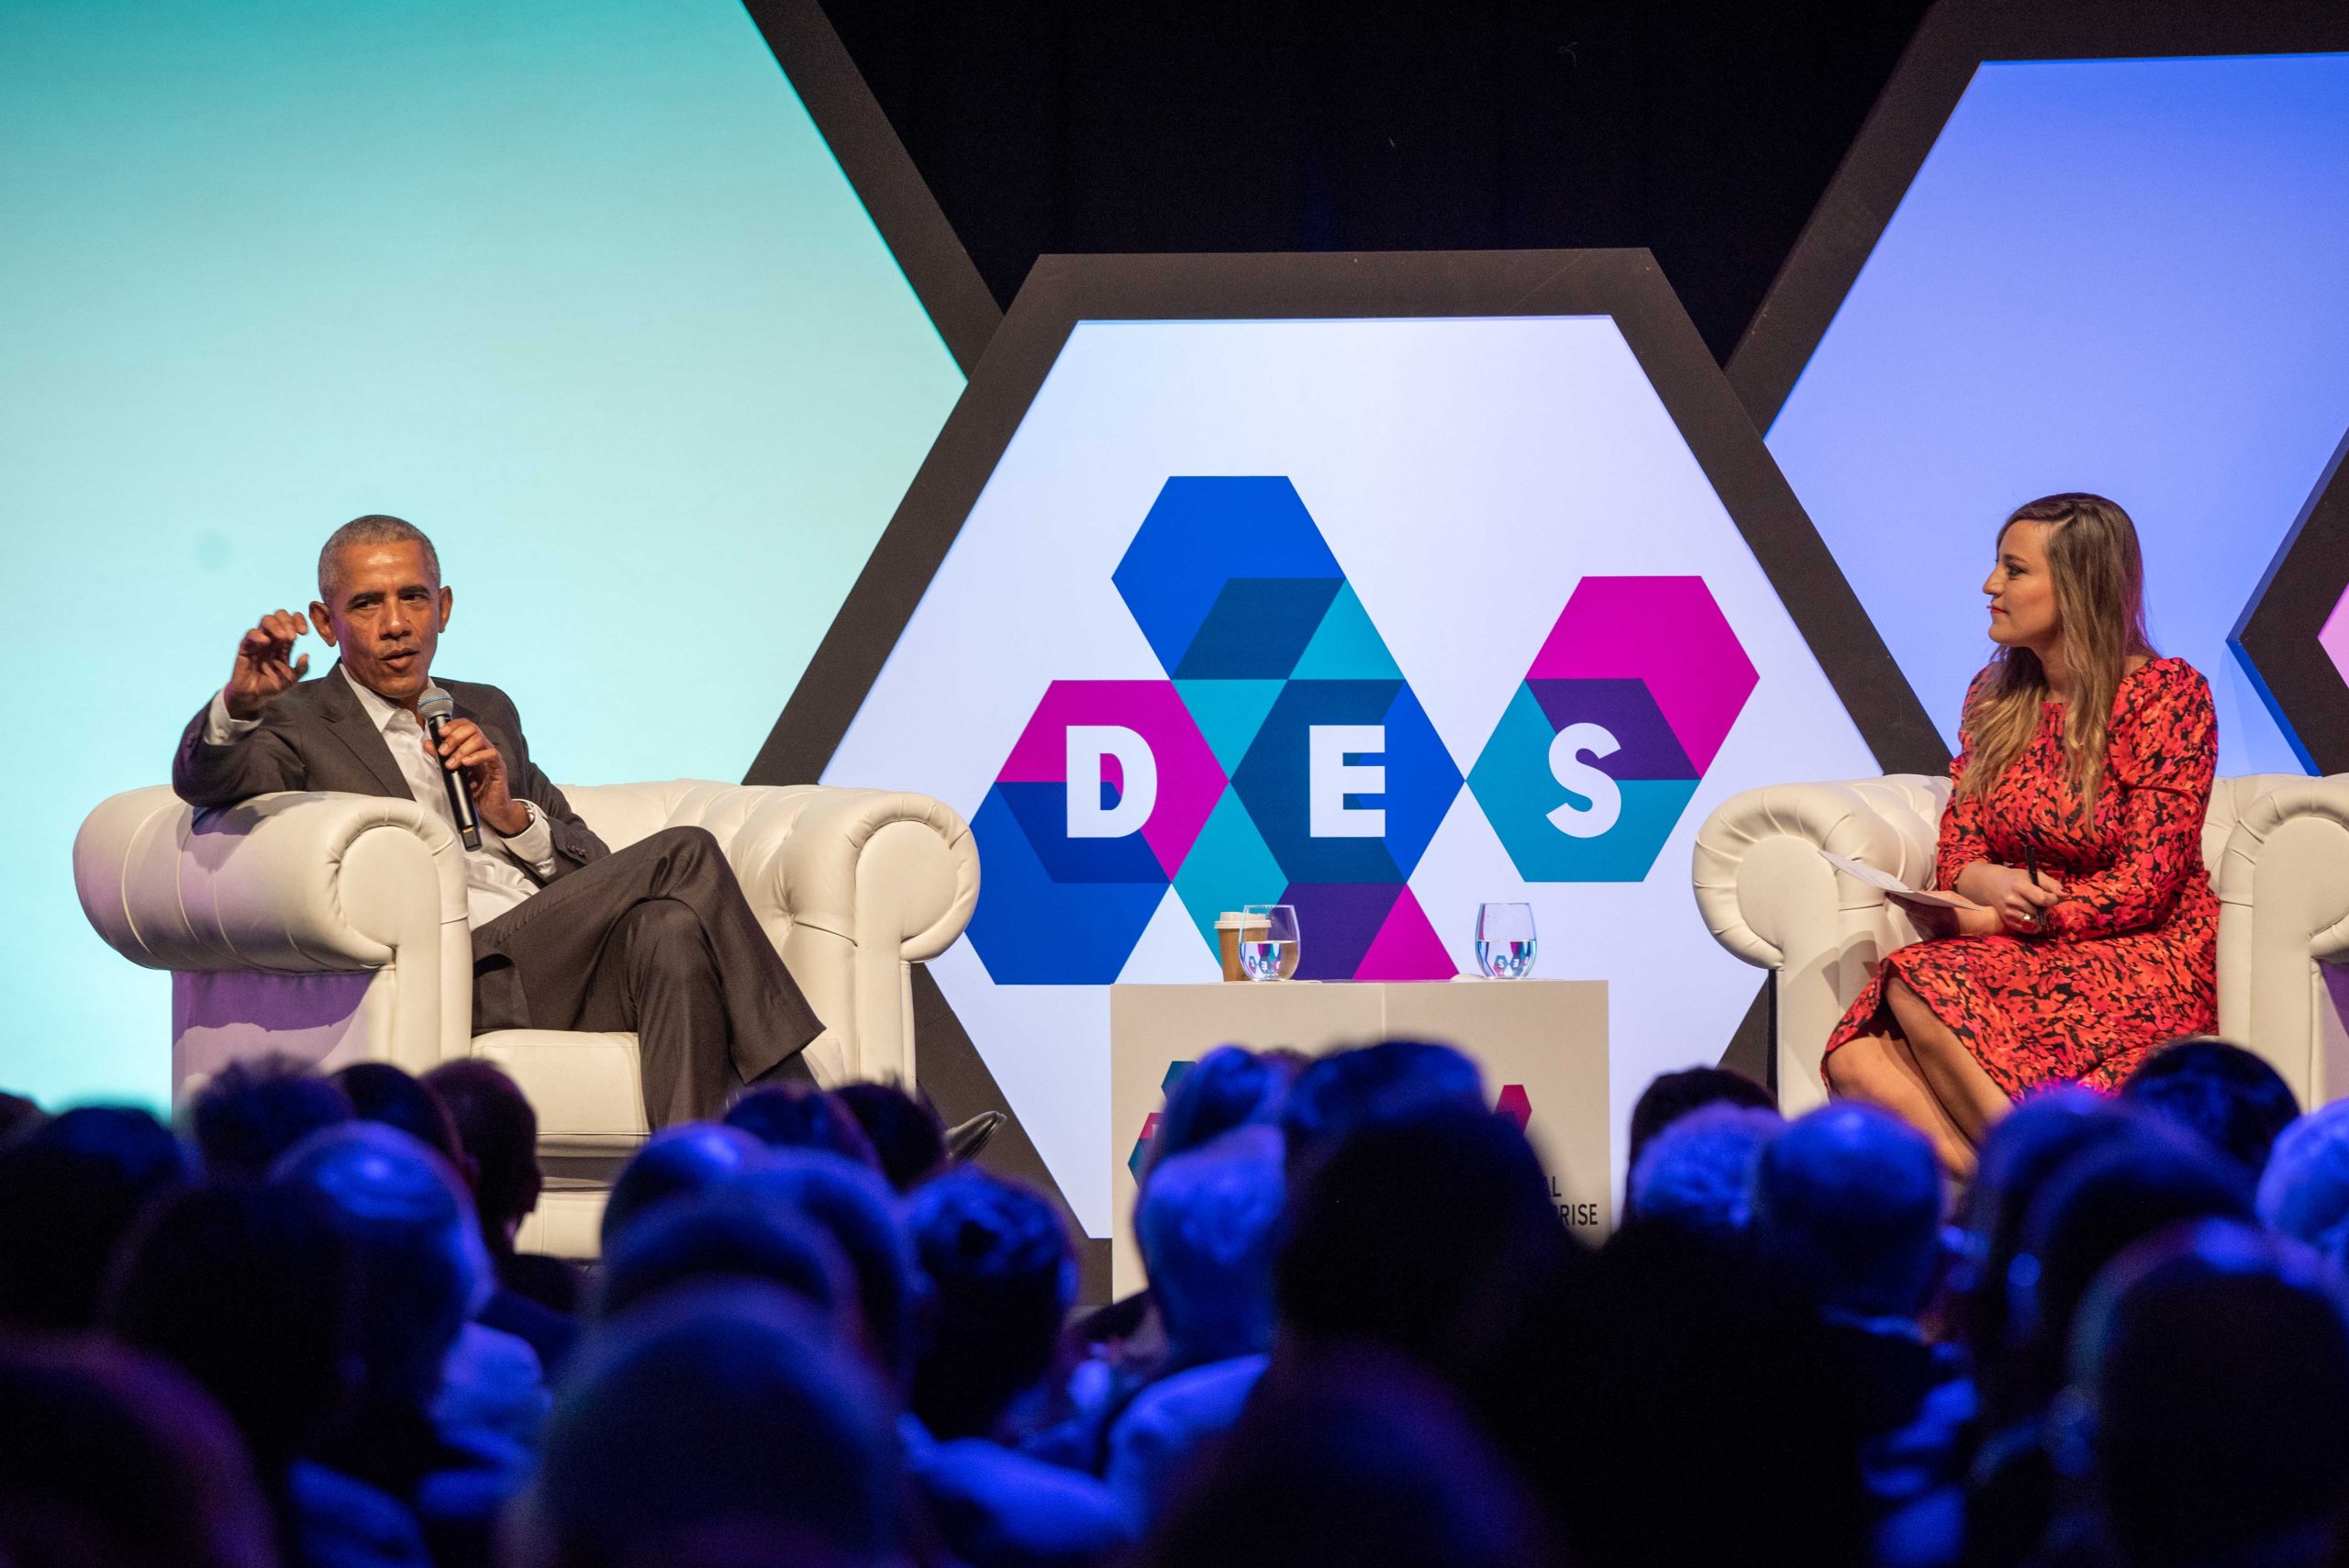 Barack Obama shares his vision on technology, the future of jobs, climate change and new generations at DES – Digital Enterprise Show 2022